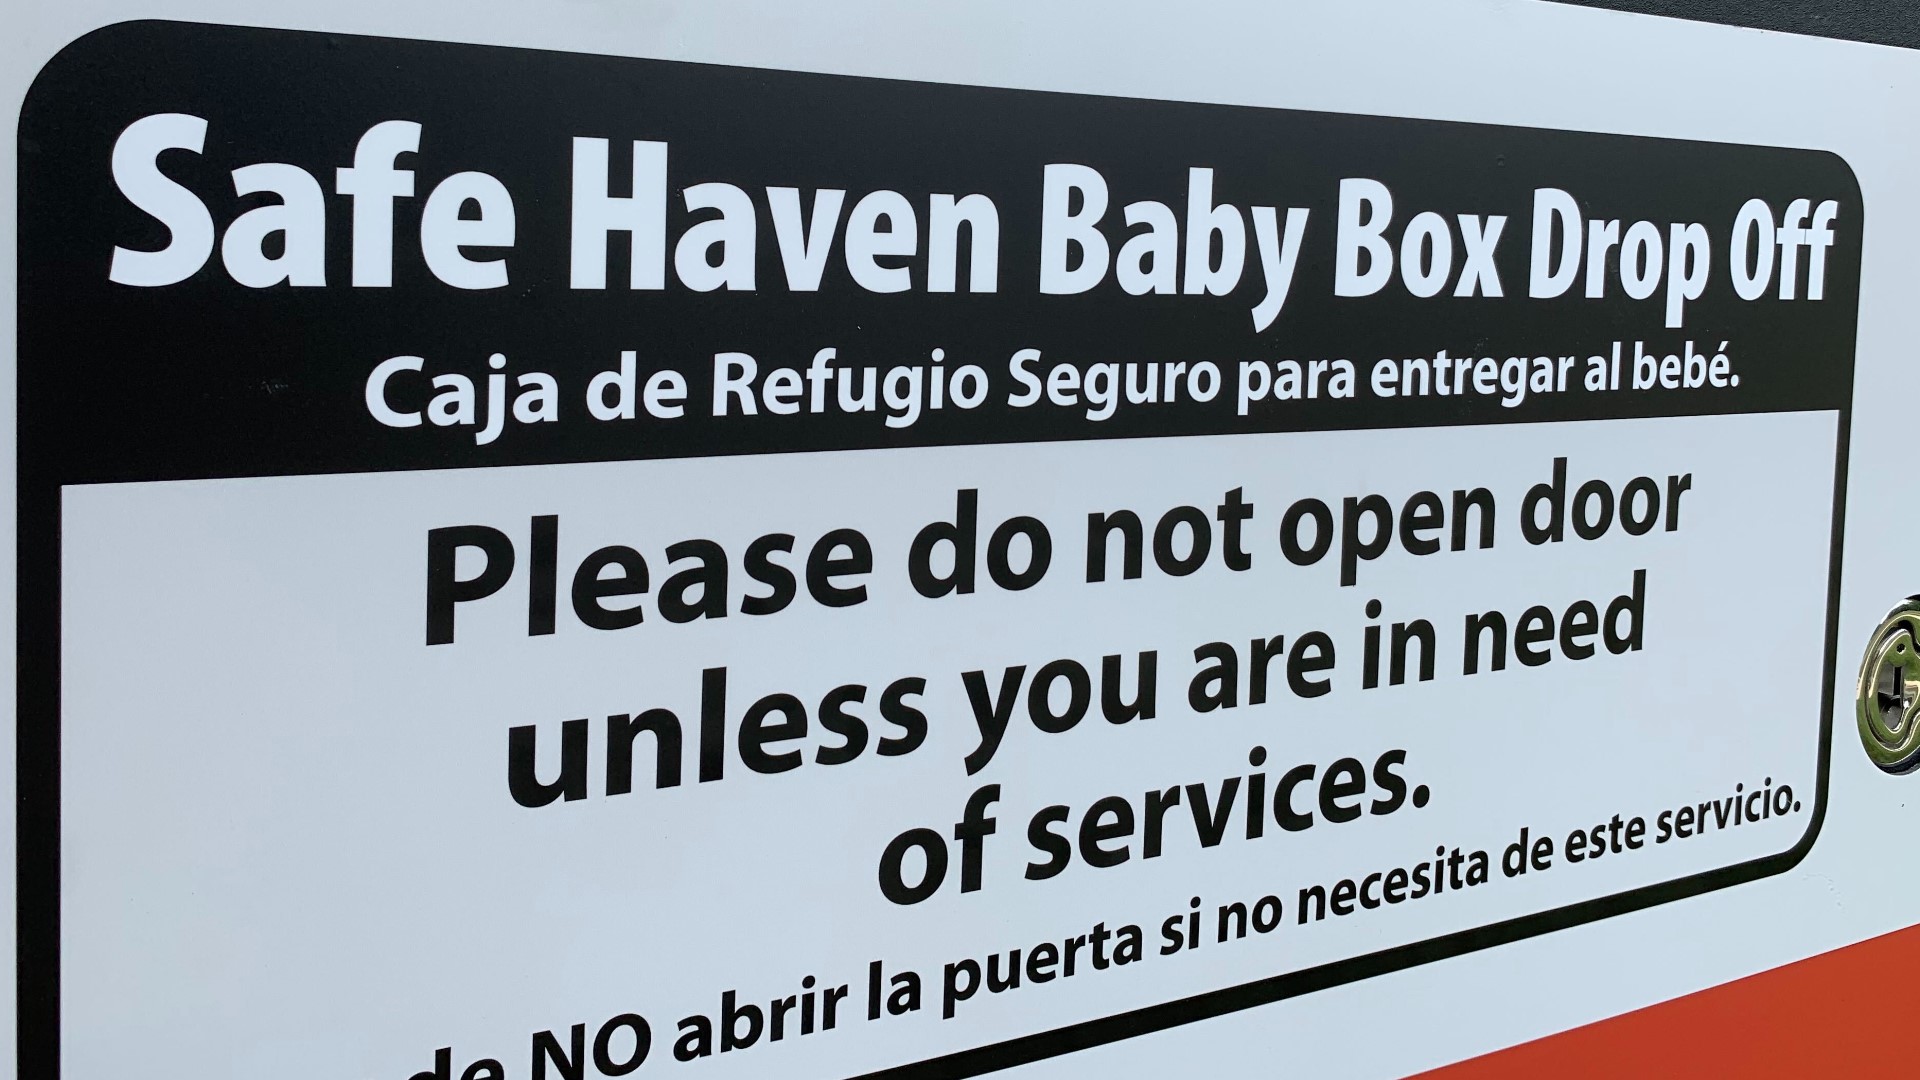 The first baby was surrendered to a baby box in Elkhart. And, less than 48 hours later, a second baby was surrendered to the baby box in Indianapolis.